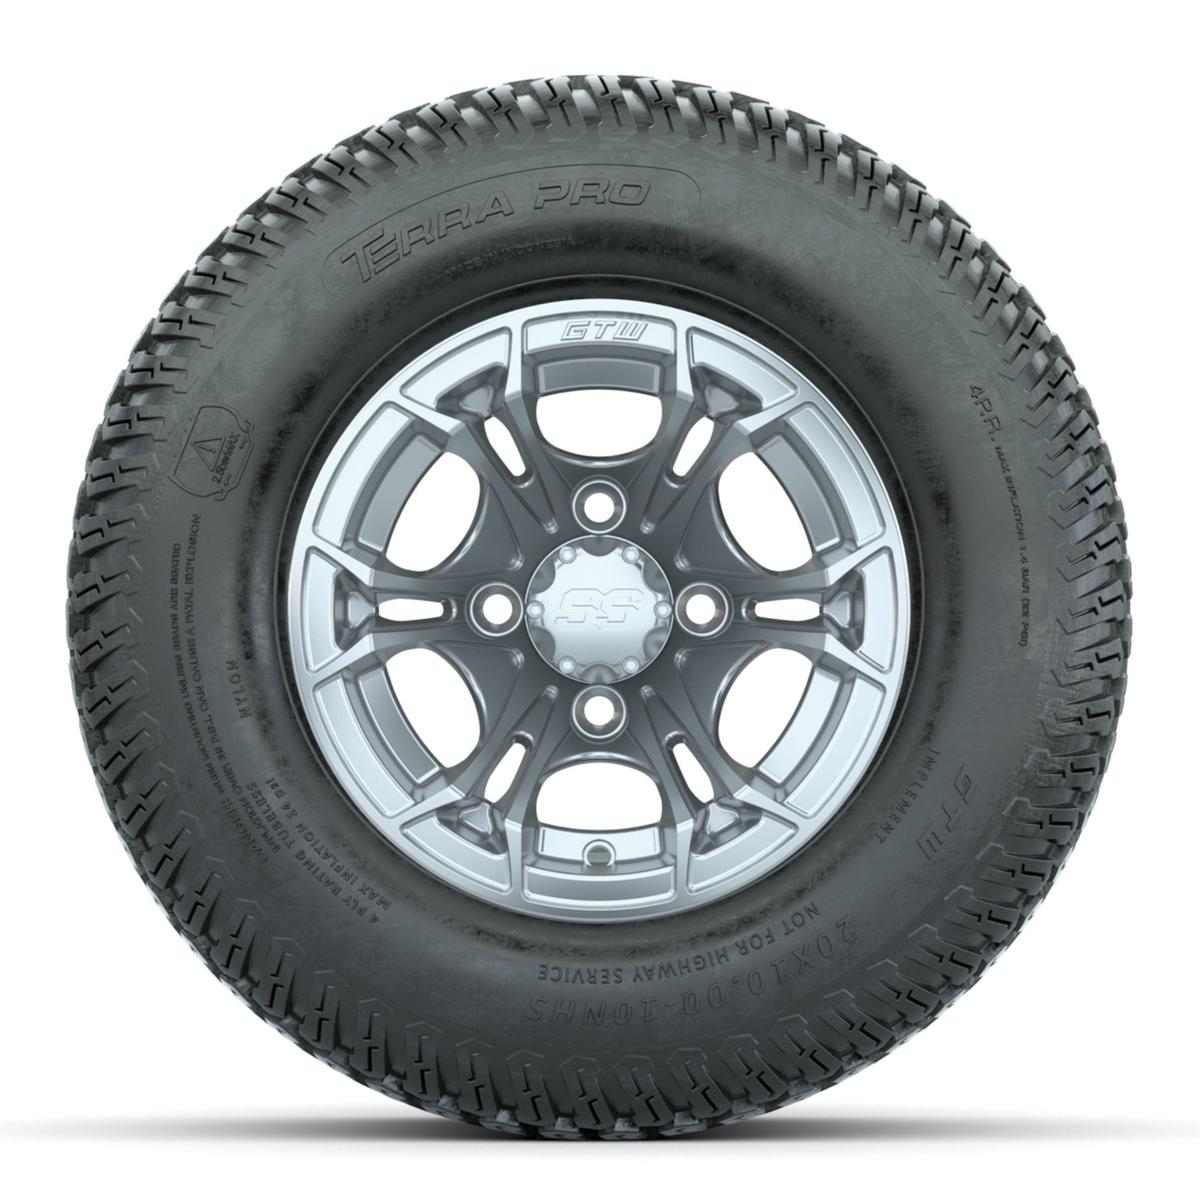 GTW Spyder Silver Brush 10 in Wheels with 20x10-10 Terra Pro S-Tread Traction Tires – Full Set